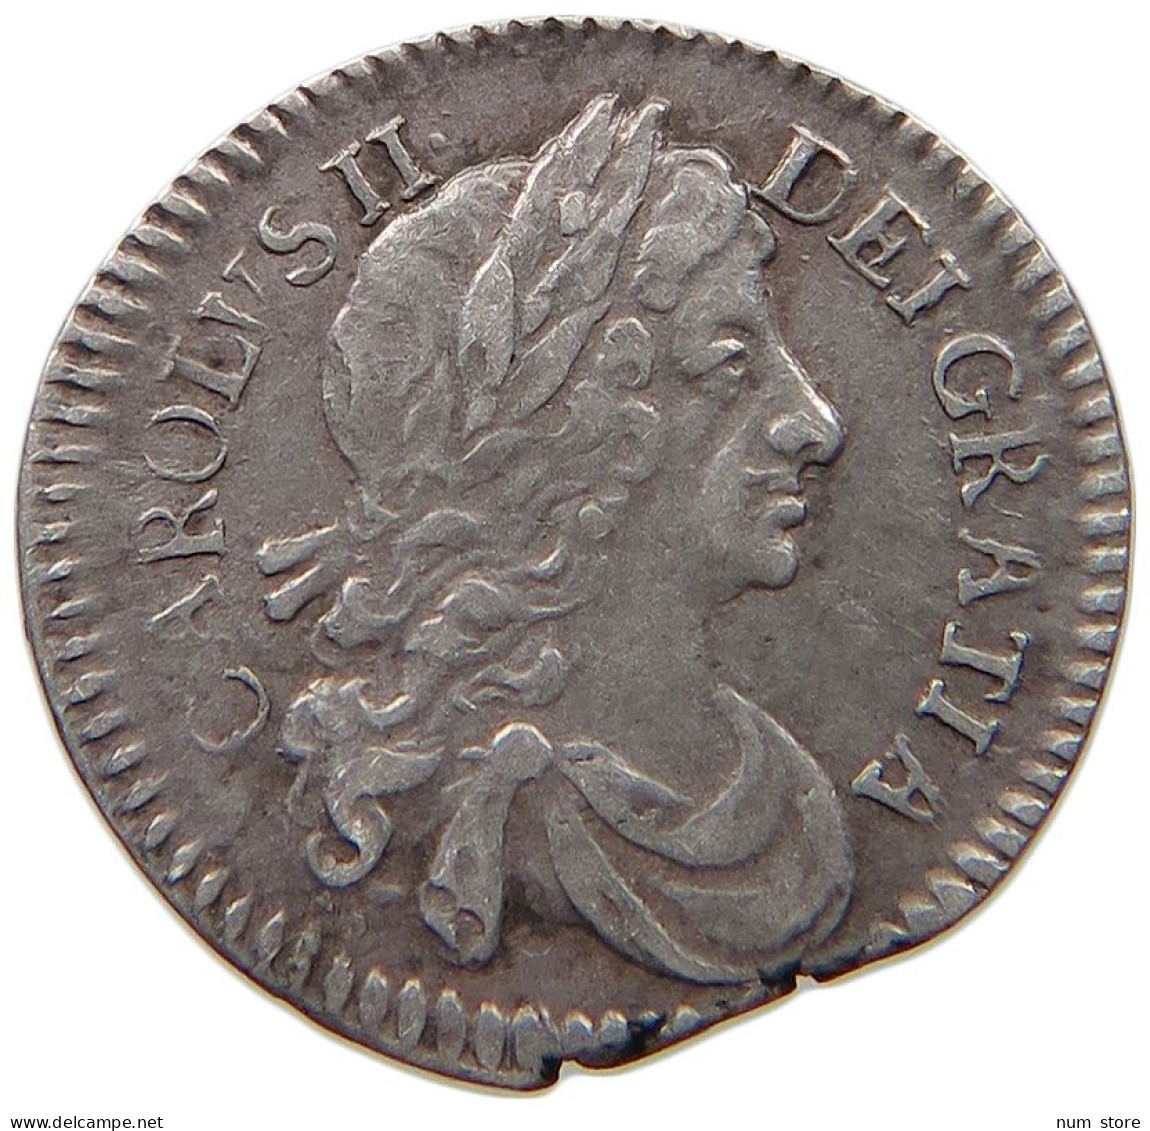 GREAT BRITAIN TWOPENCE 1684 Charles II (1660-1685) #t107 0511 - D. 2 Pence